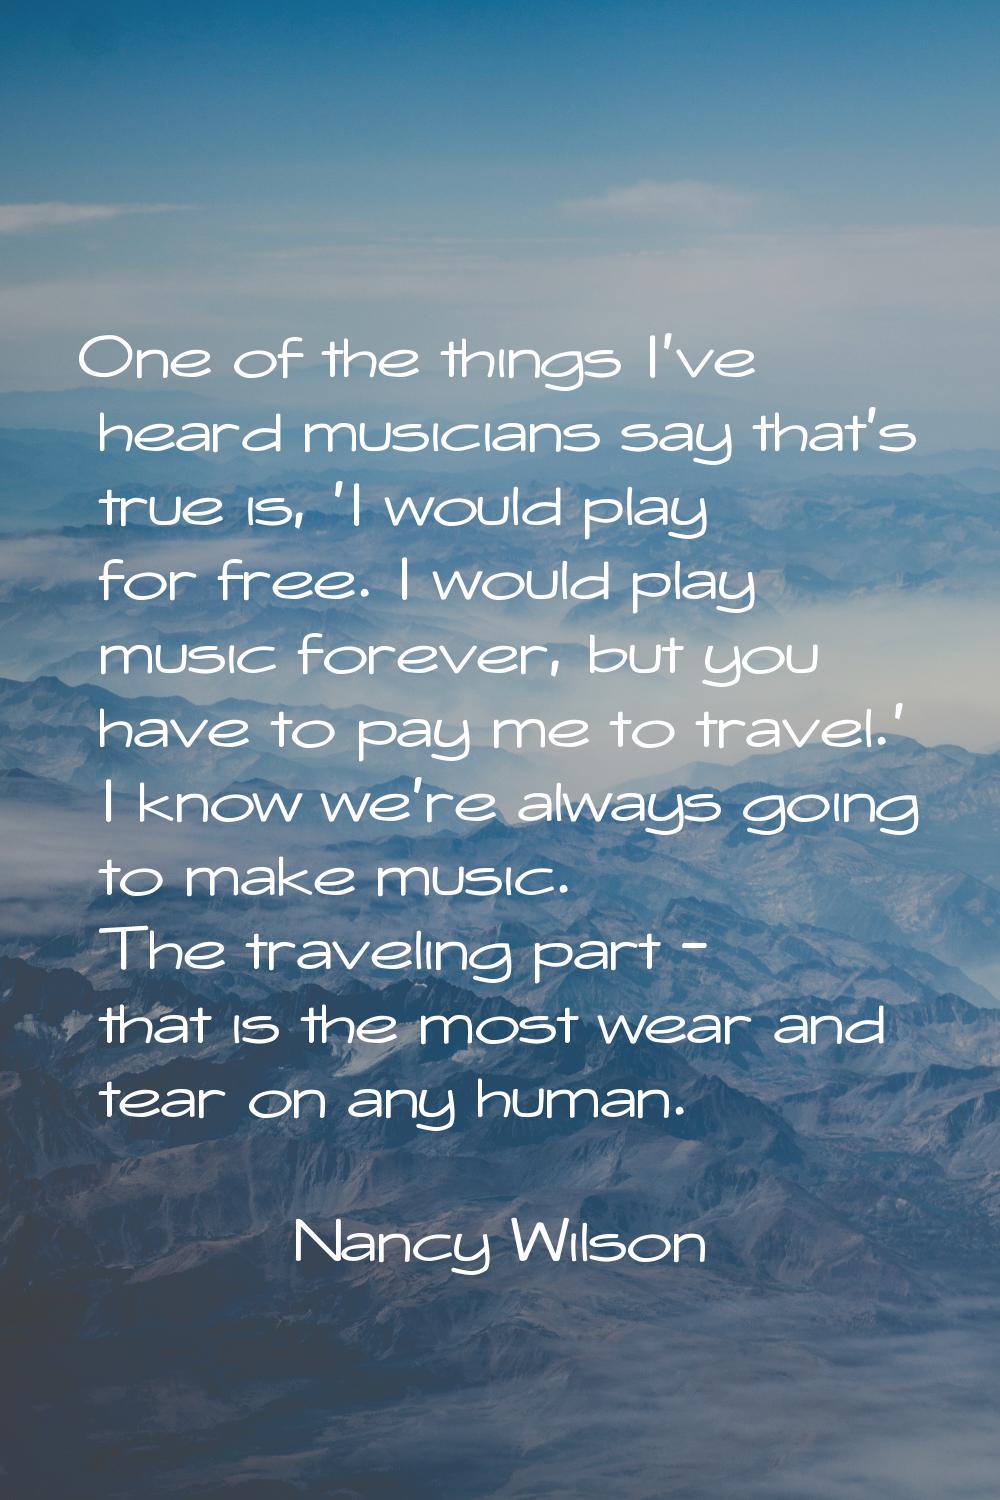 One of the things I've heard musicians say that's true is, 'I would play for free. I would play mus